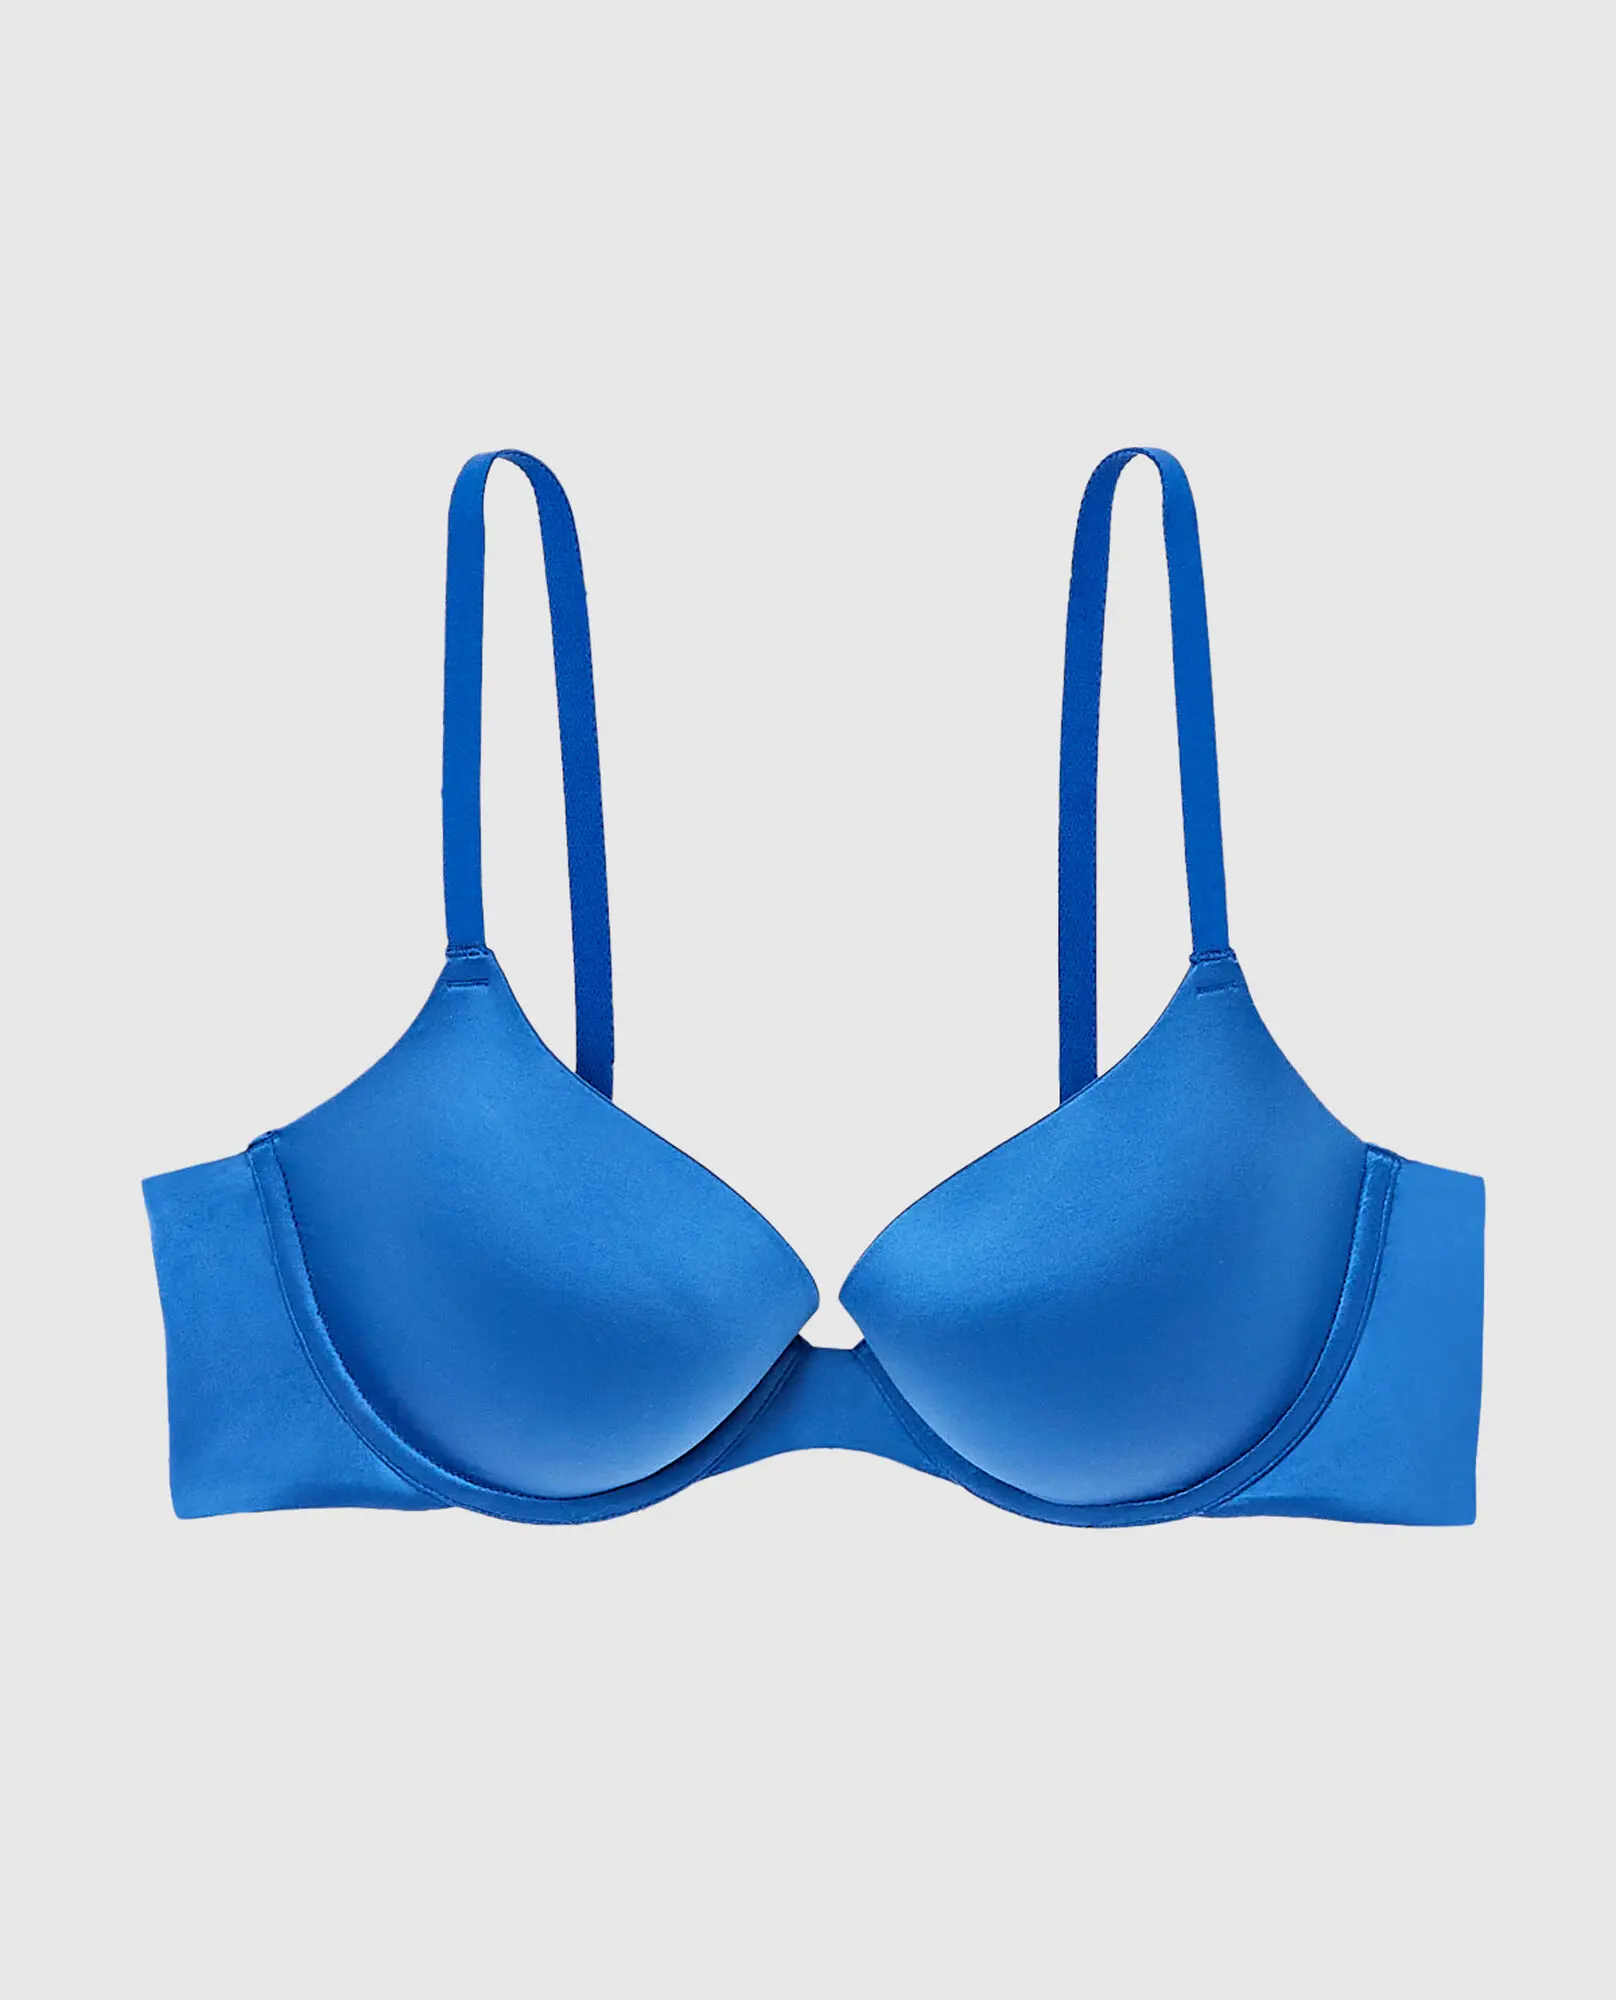 La Senza Demi Bra For Womens - Get Best Price from Manufacturers